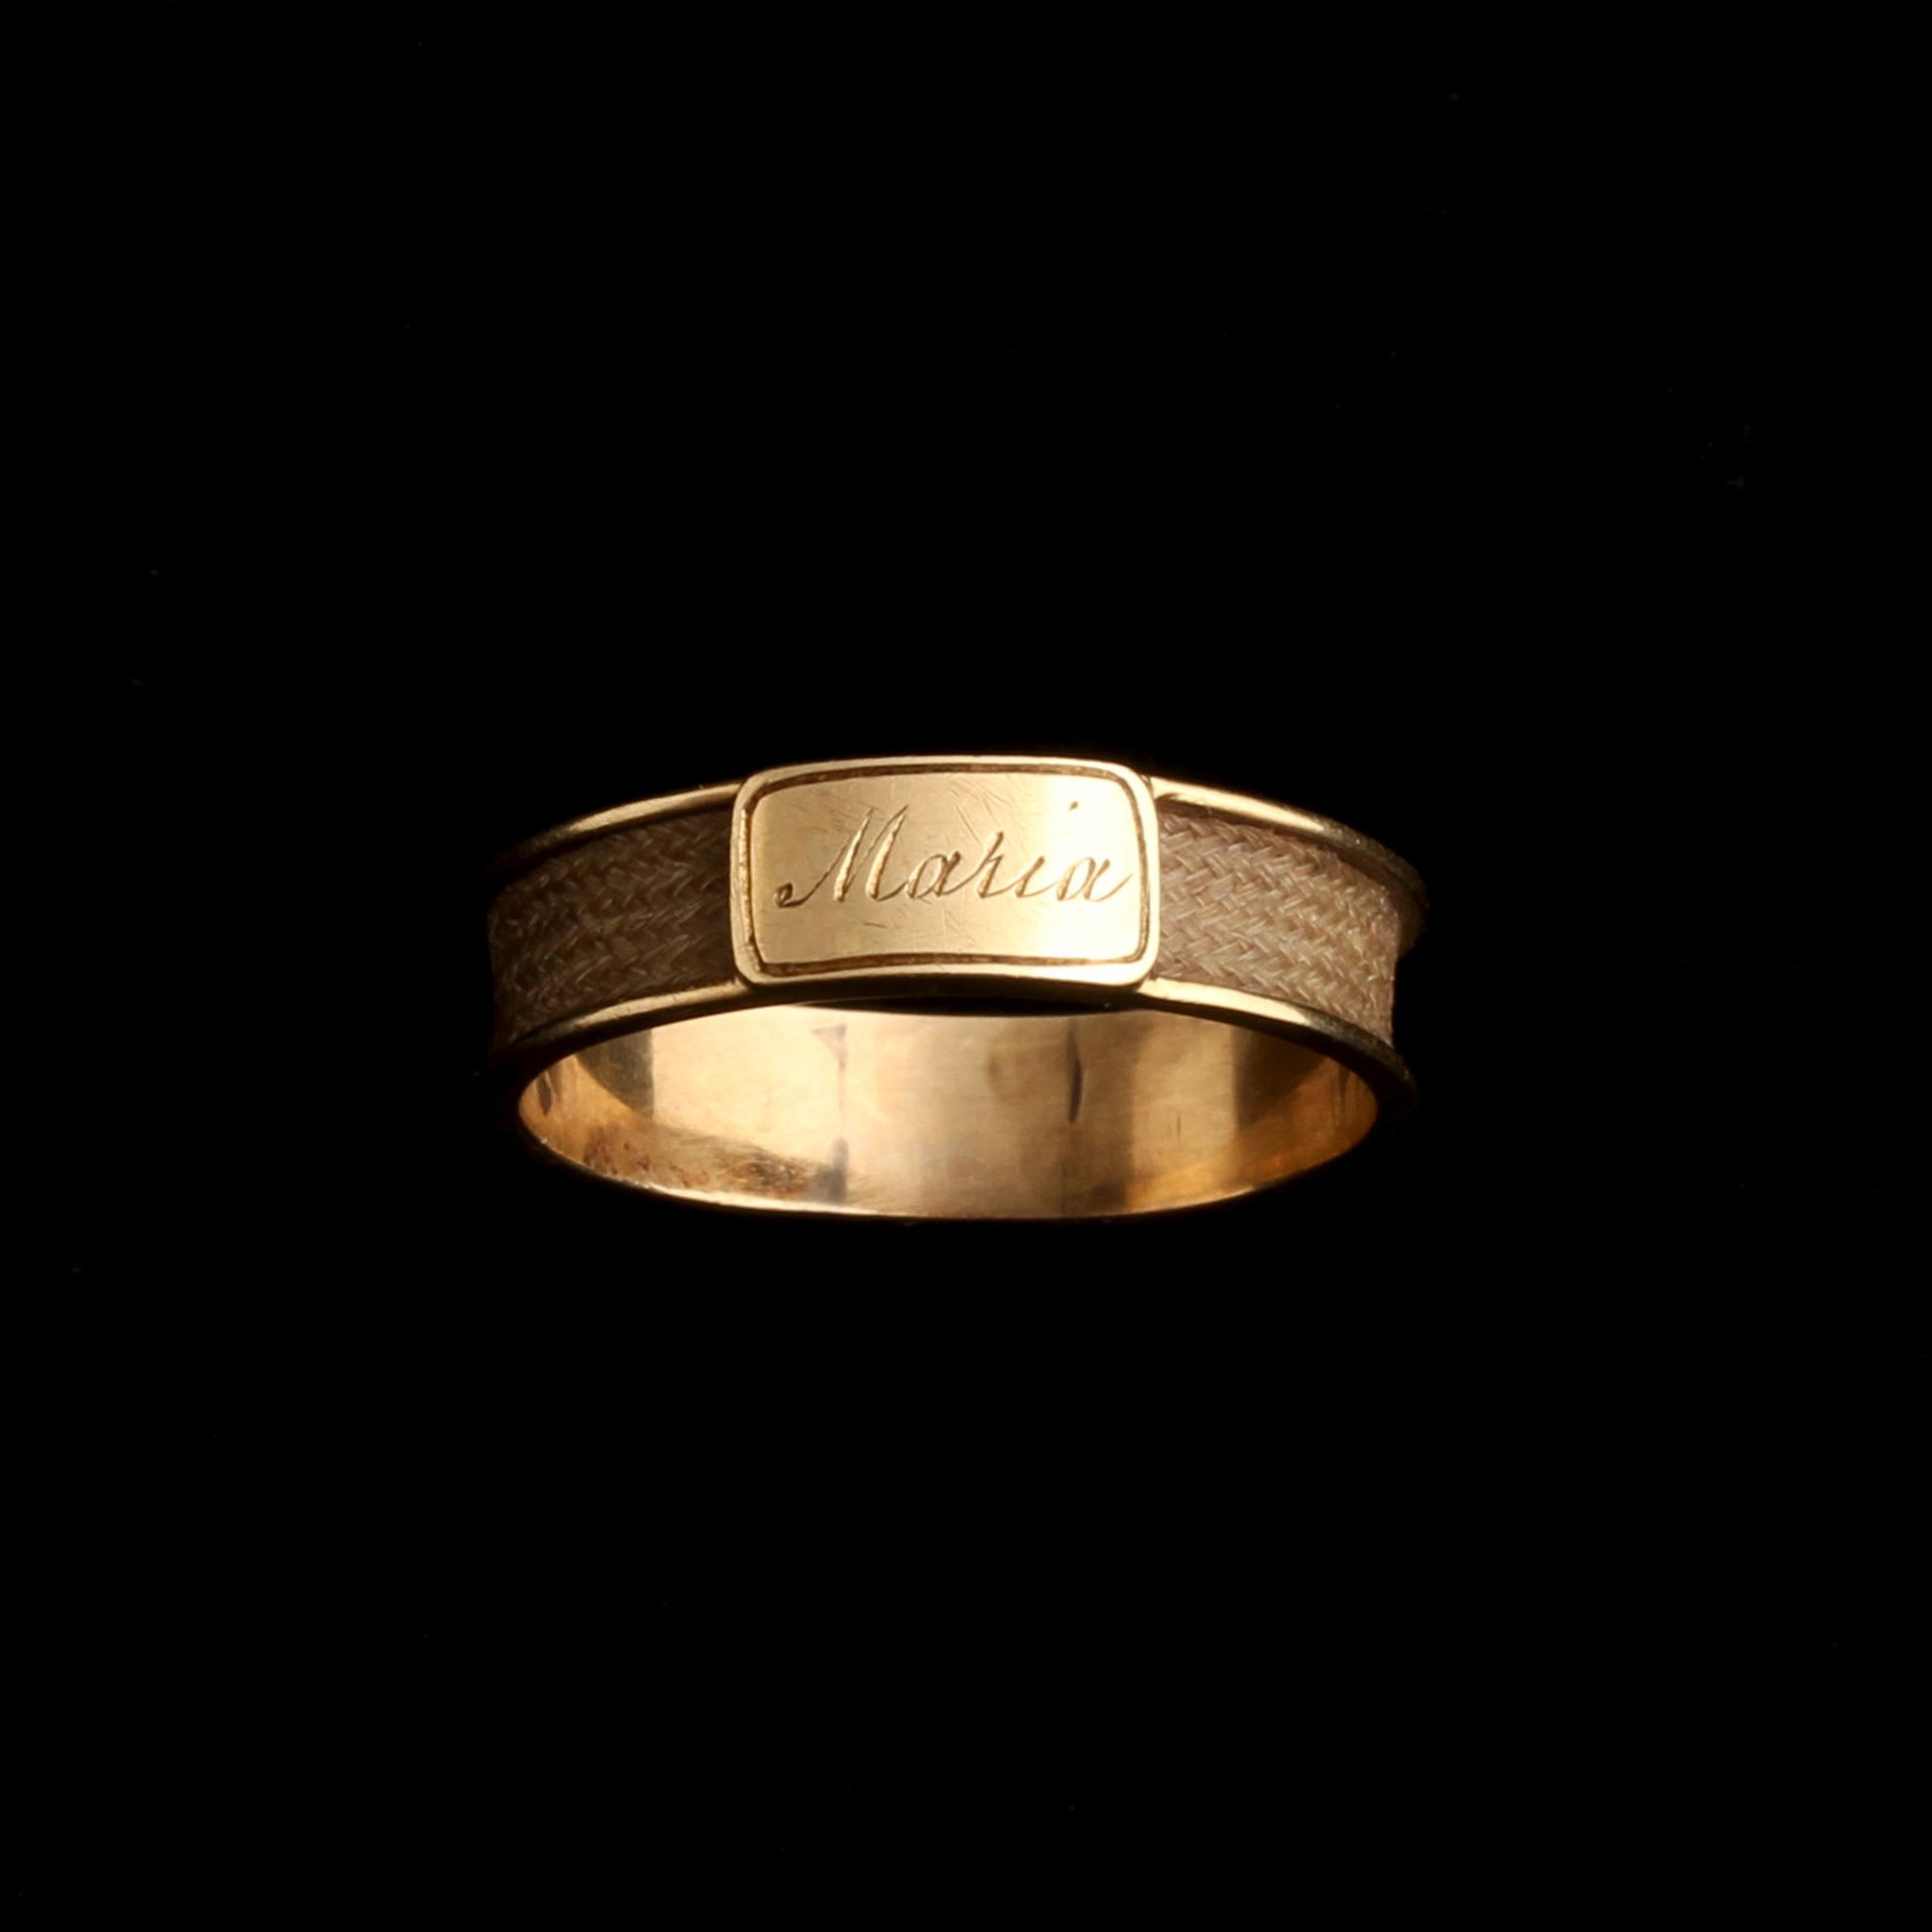 Victorian "Maria" Mourning Band